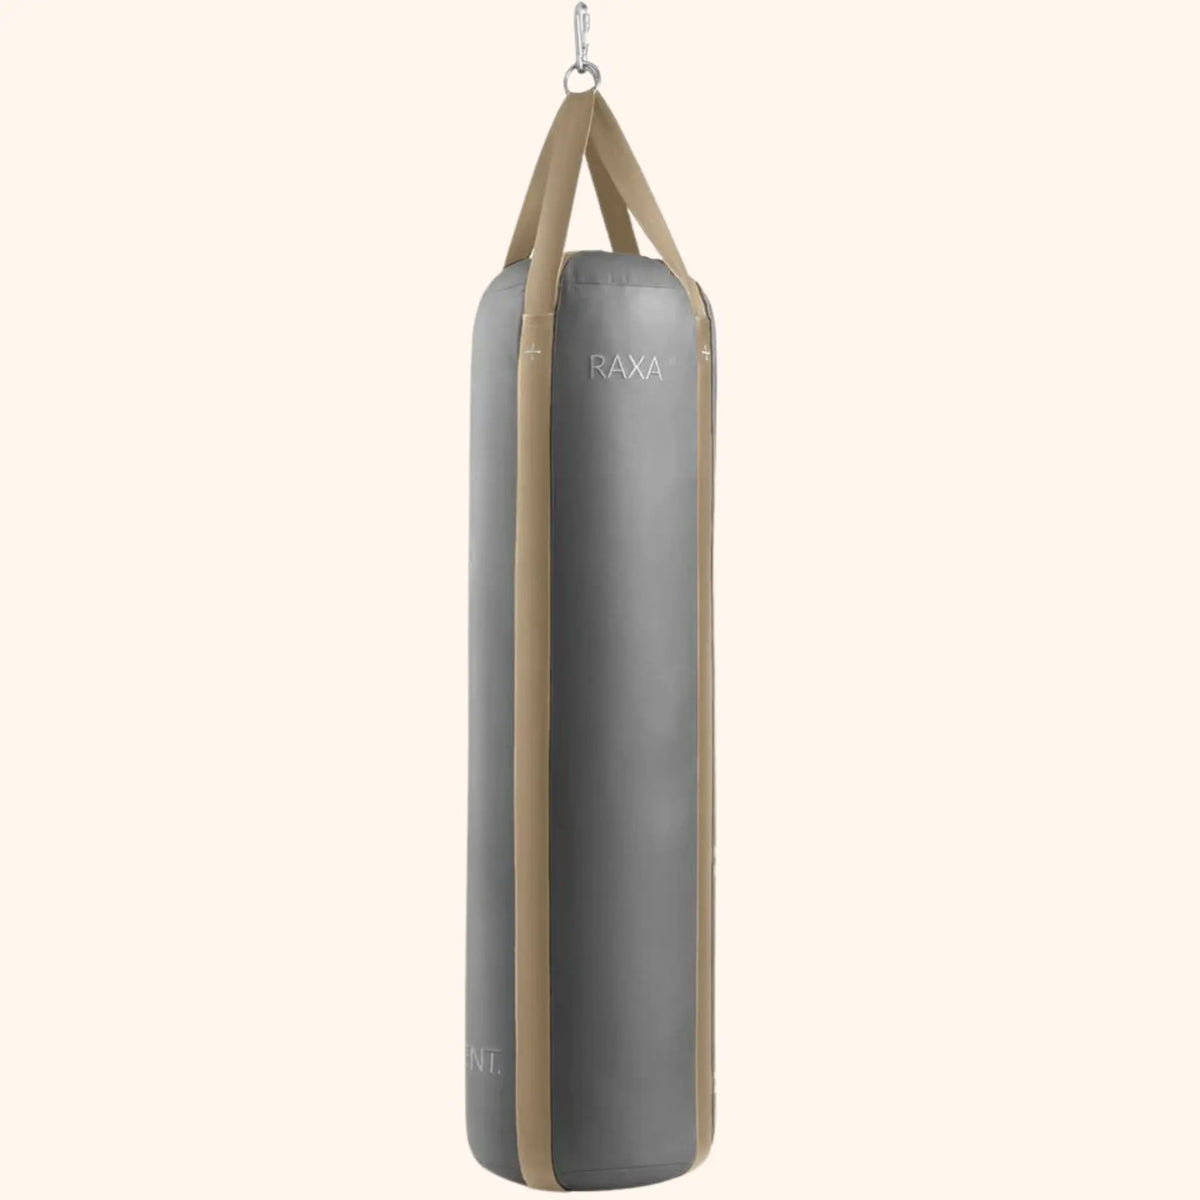 PENT | RAXA Luxury Genuine Leather Boxing Bag (with filling) PENT